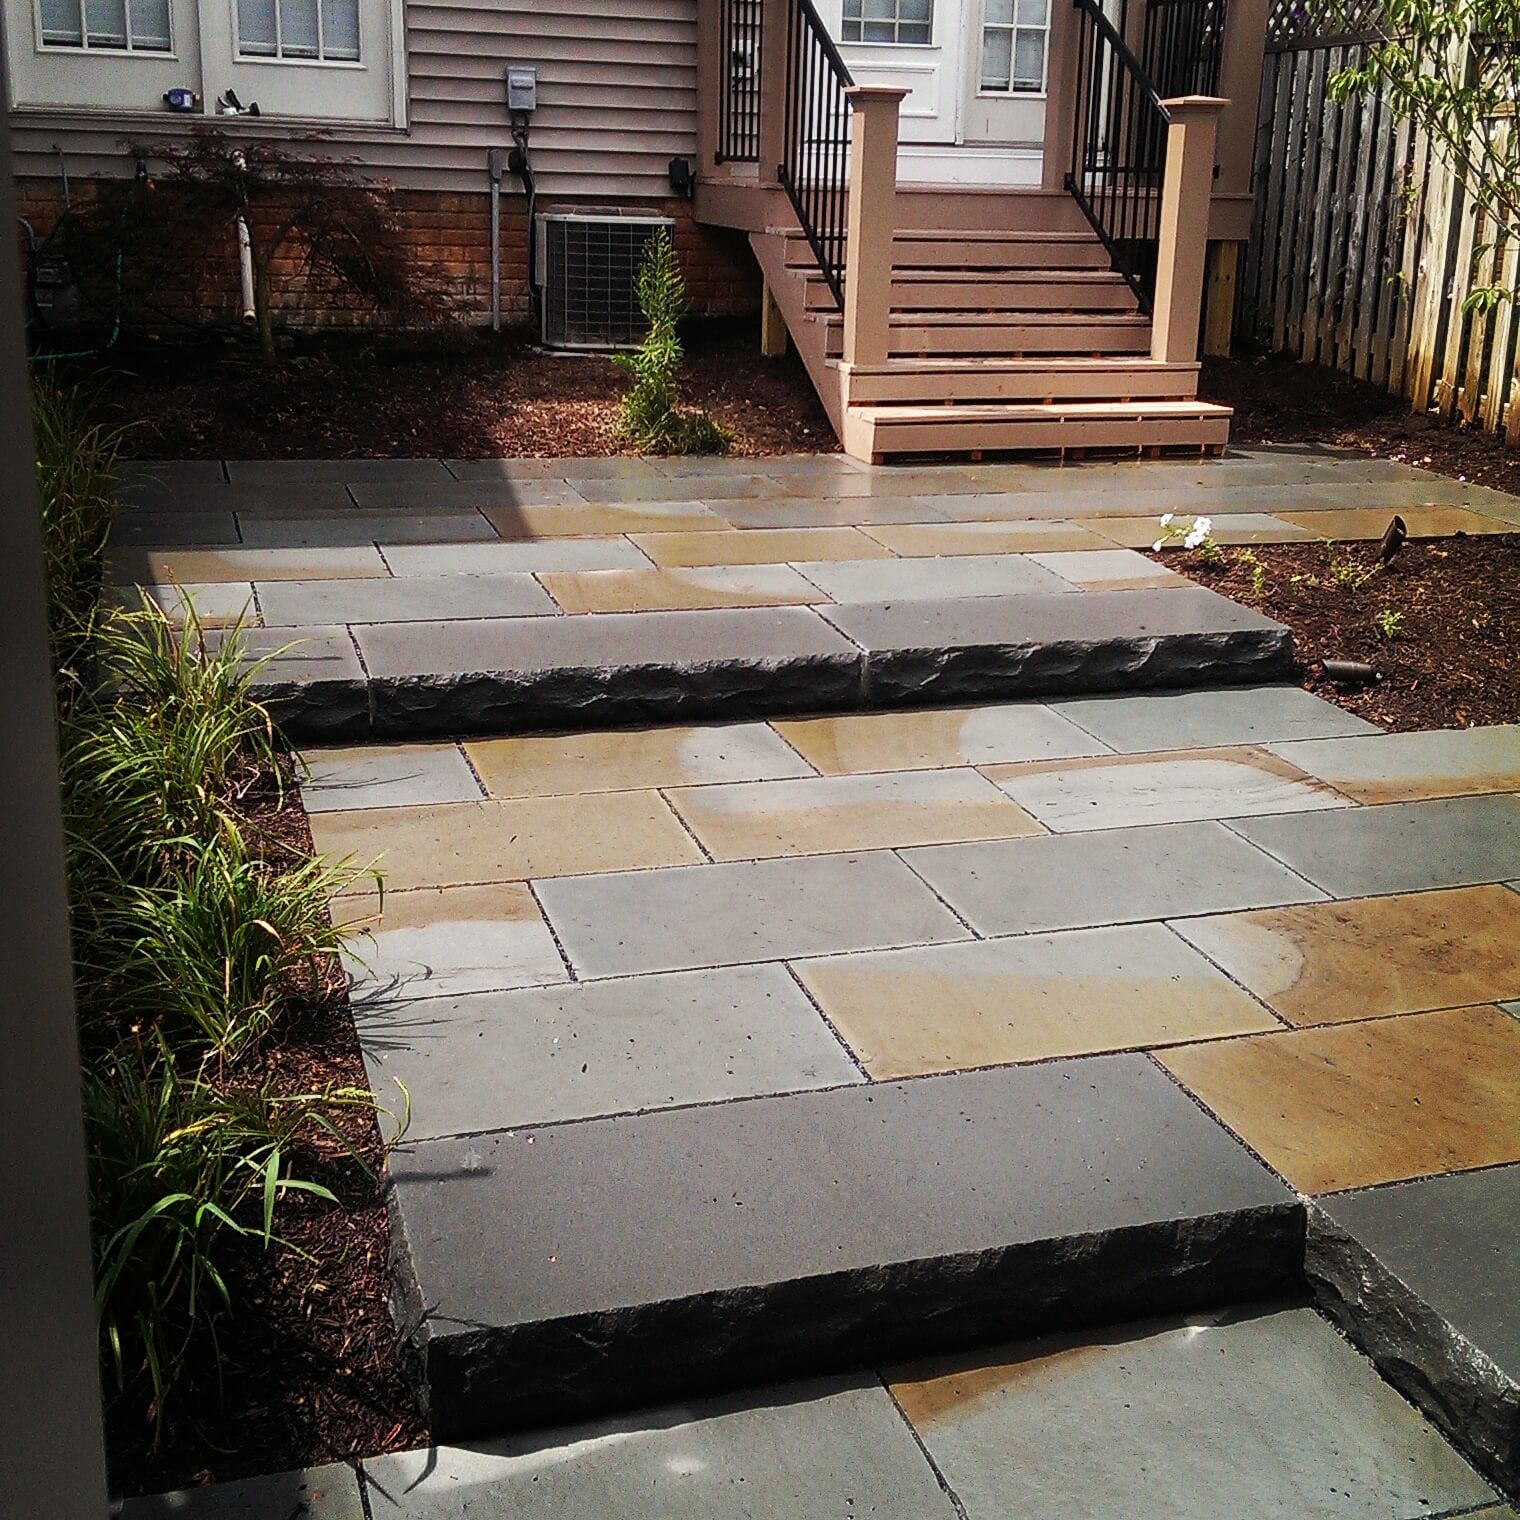 240 Multi-Level Townhouse Flagstone Patio with Flame-Edged Stepper Access to Garage